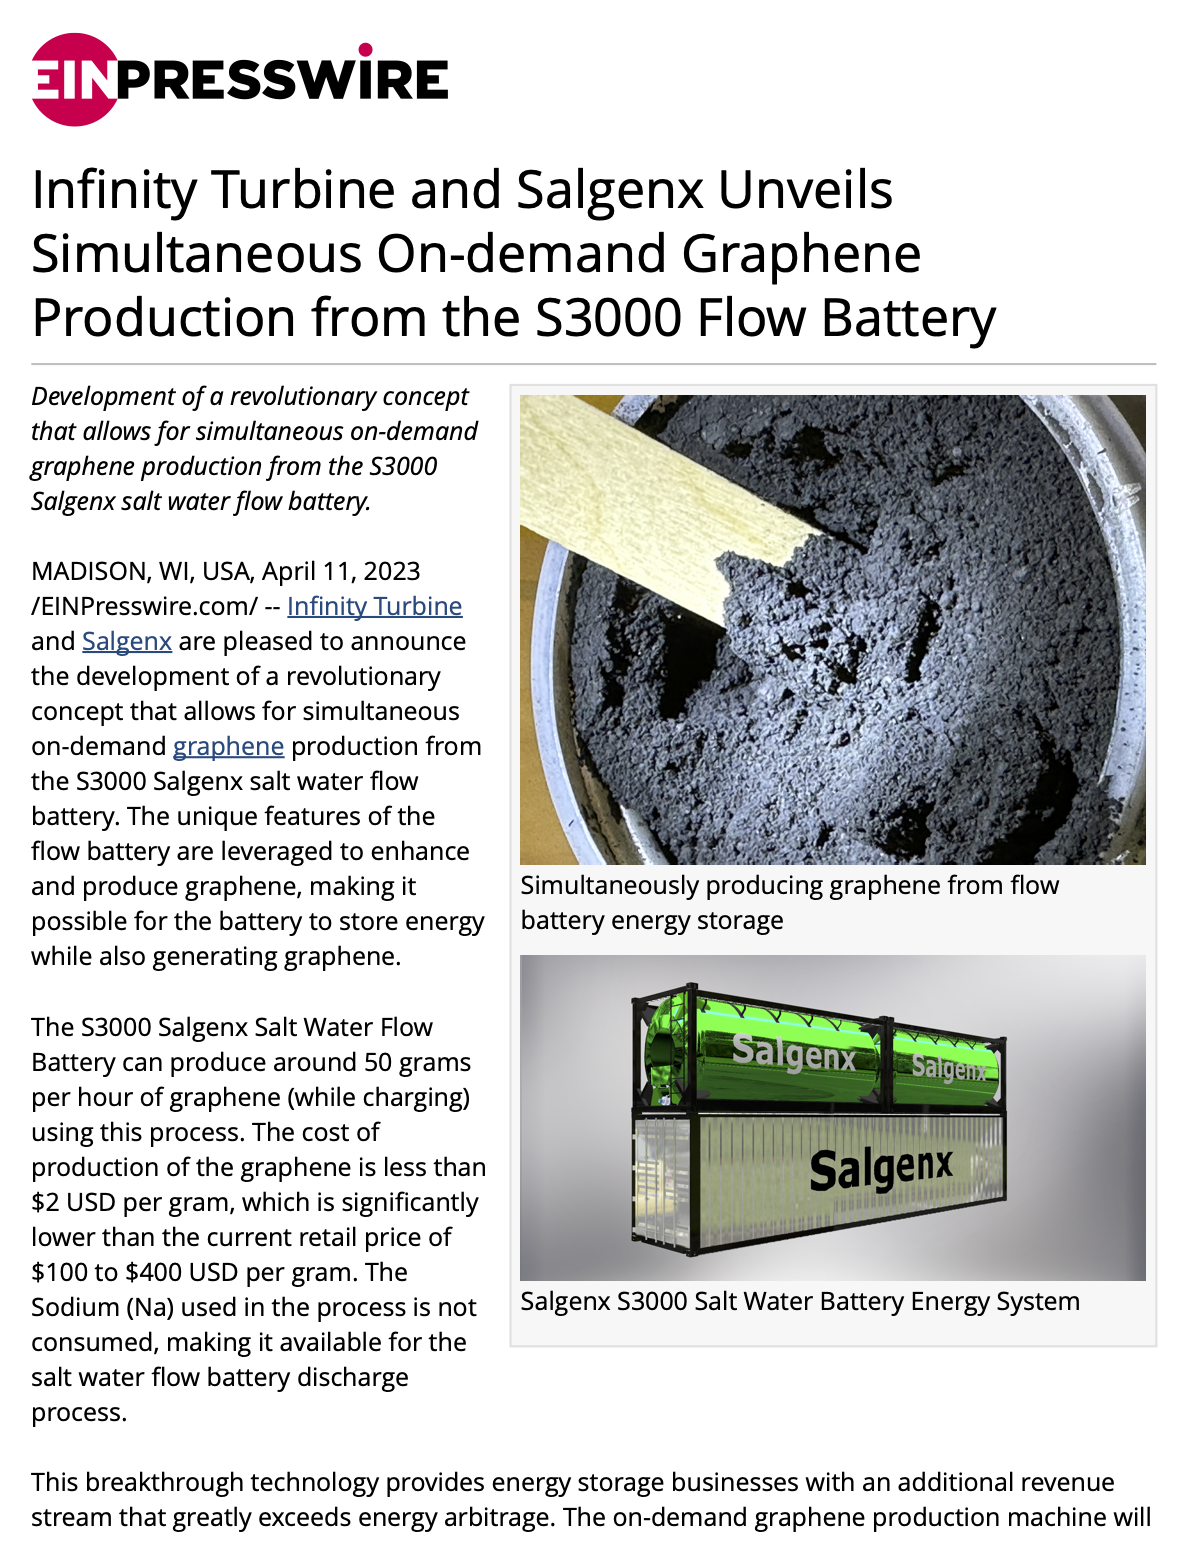 Infinity Turbine and Salgenx Unveils Simultaneous On-demand Graphene Production from the S3000 Flow Battery